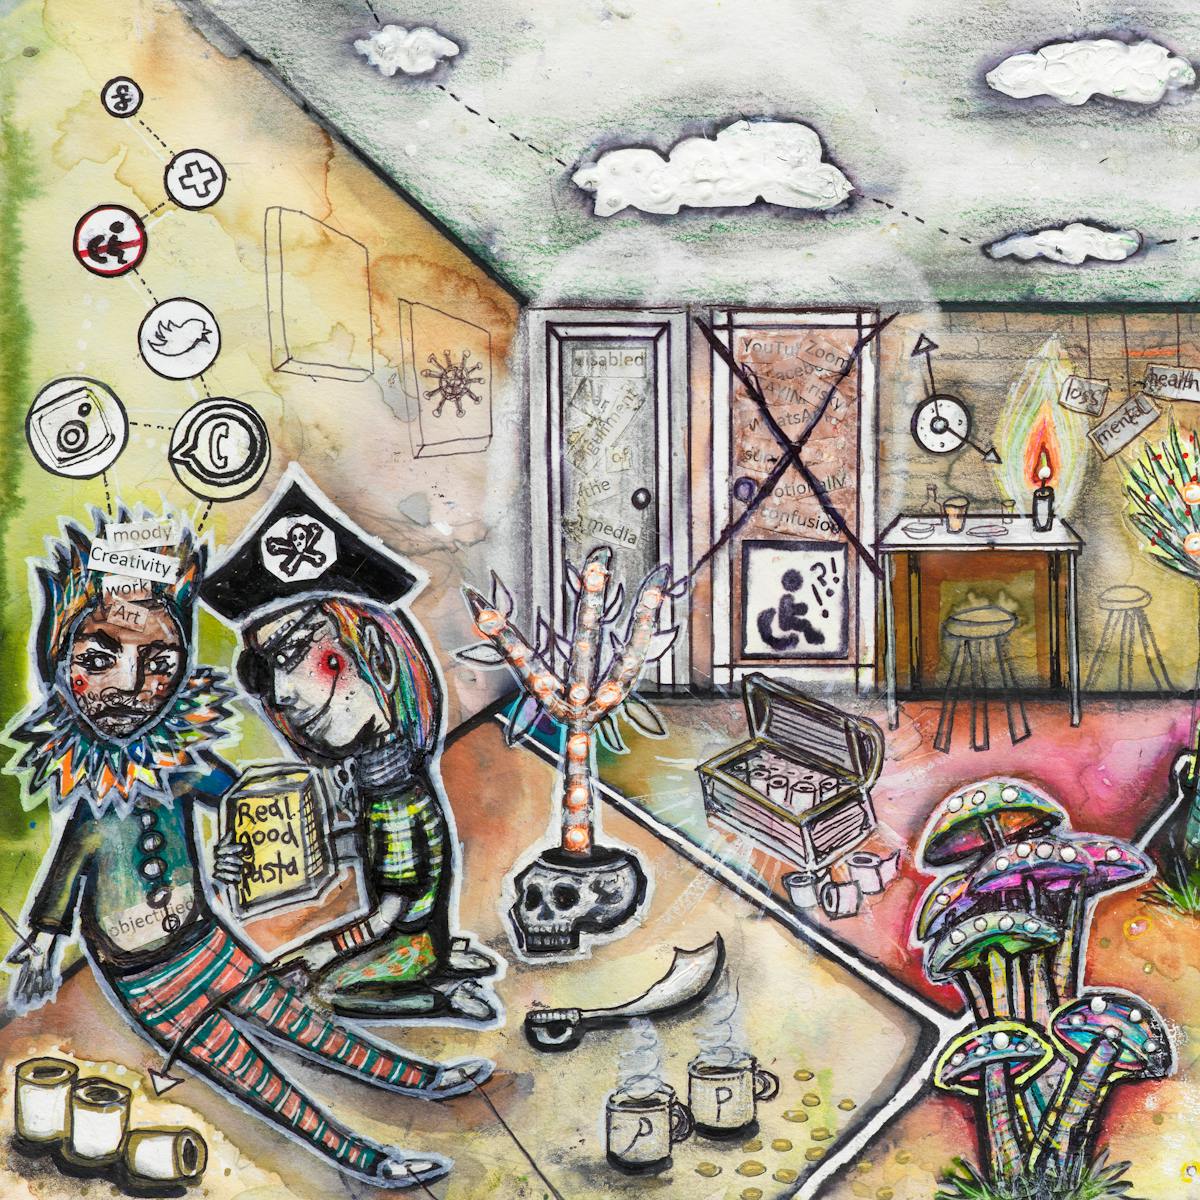 Artwork using watercolour and ink incorporating collaged words throughout the scene. The artwork shows a busy multi-coloured household room separated by intersecting white lines drawn across the floor.  The theme is that of a desert island containing elements such as: a treasure chest filled with toilet rolls; a wall clock with oversized hands; an artwork depicting the coronavirus; a doorway with a large cross drawn through it on which there is a disabled symbol of a wheelchair; a rainbow painted on a wall; and a small rocket with the words ‘medical’ and ‘NHS’ taking off out of a palm tree. In the background, a bath overflows with turquois water onto golden sand leading to the foreground where a video camera with the word ‘pandemic’ is mounted on a tripod. Opposite that, a man dressed in a ruff and a crown sits against a wall looking tired with various icons including a disabled symbol with a wheelchair, as well as those belonging to social media joined by dotted lines above his head. On his crown are the words ‘moody’, ‘creativity’, ‘work’ and ‘art’, while on his chest is the word ‘objectified’. Kneeling beside him, another person dressed as a pirate, holds a box of pasta.